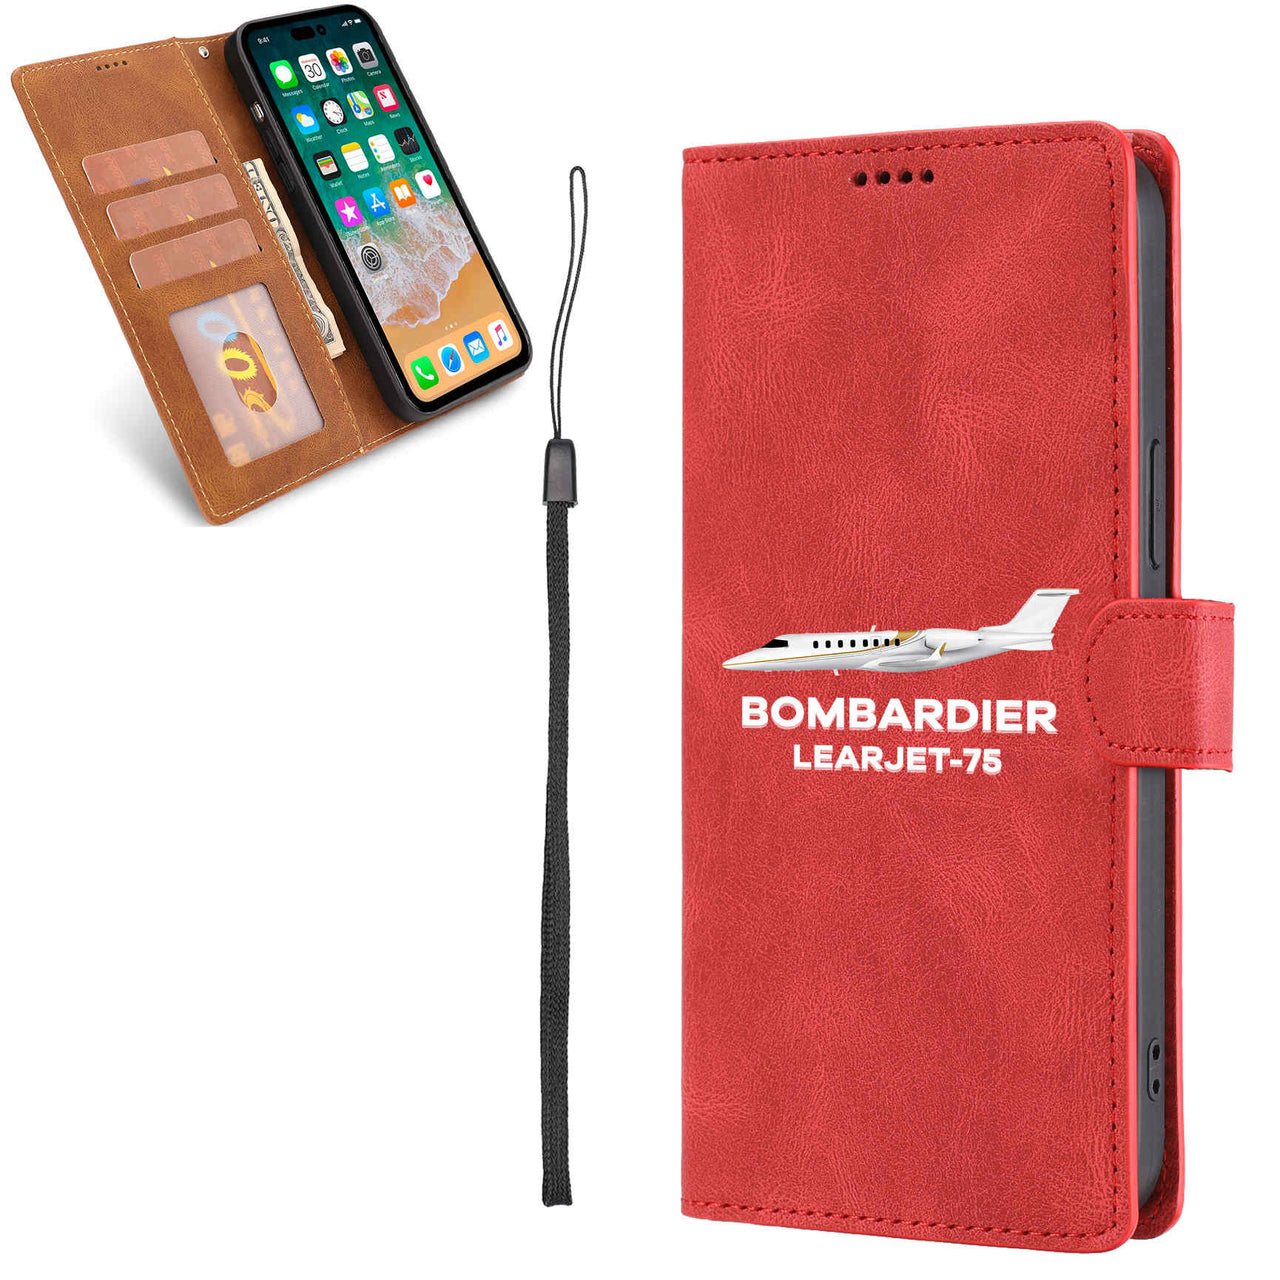 The Bombardier Learjet 75 Designed Leather Samsung S & Note Cases